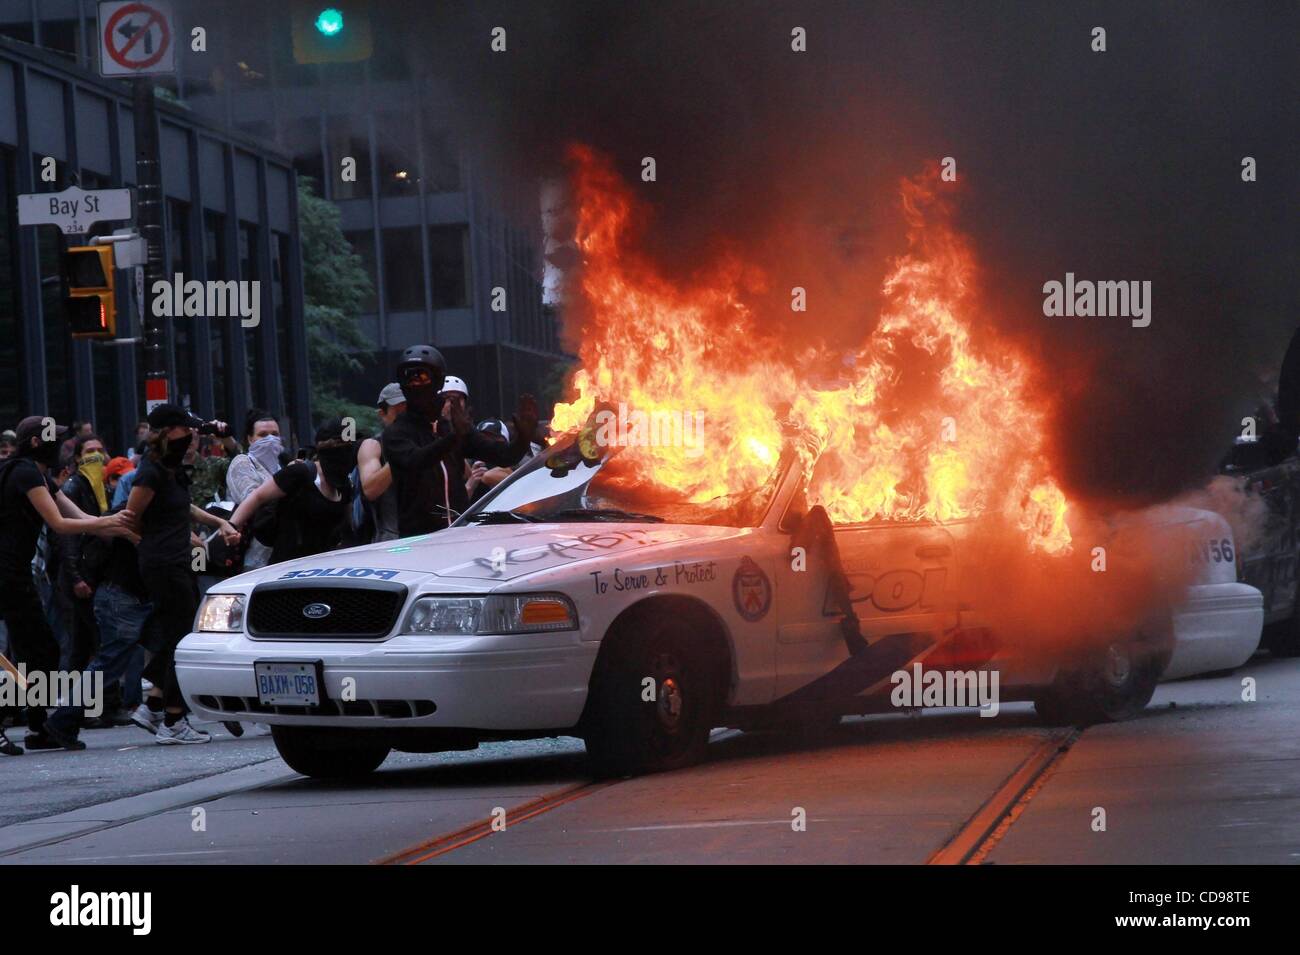 Jun 26, 2010 - Toronto, Ontario, Canada - Cop cars are smashed and set on fire as rioters take over the downtown. Chaos erupted downtown due to the G8 and G20 summits. The G20 Summit is being held from June 26-27. Protesters flocked to the streets and police presence increased over the weekend. (Cre Stock Photo